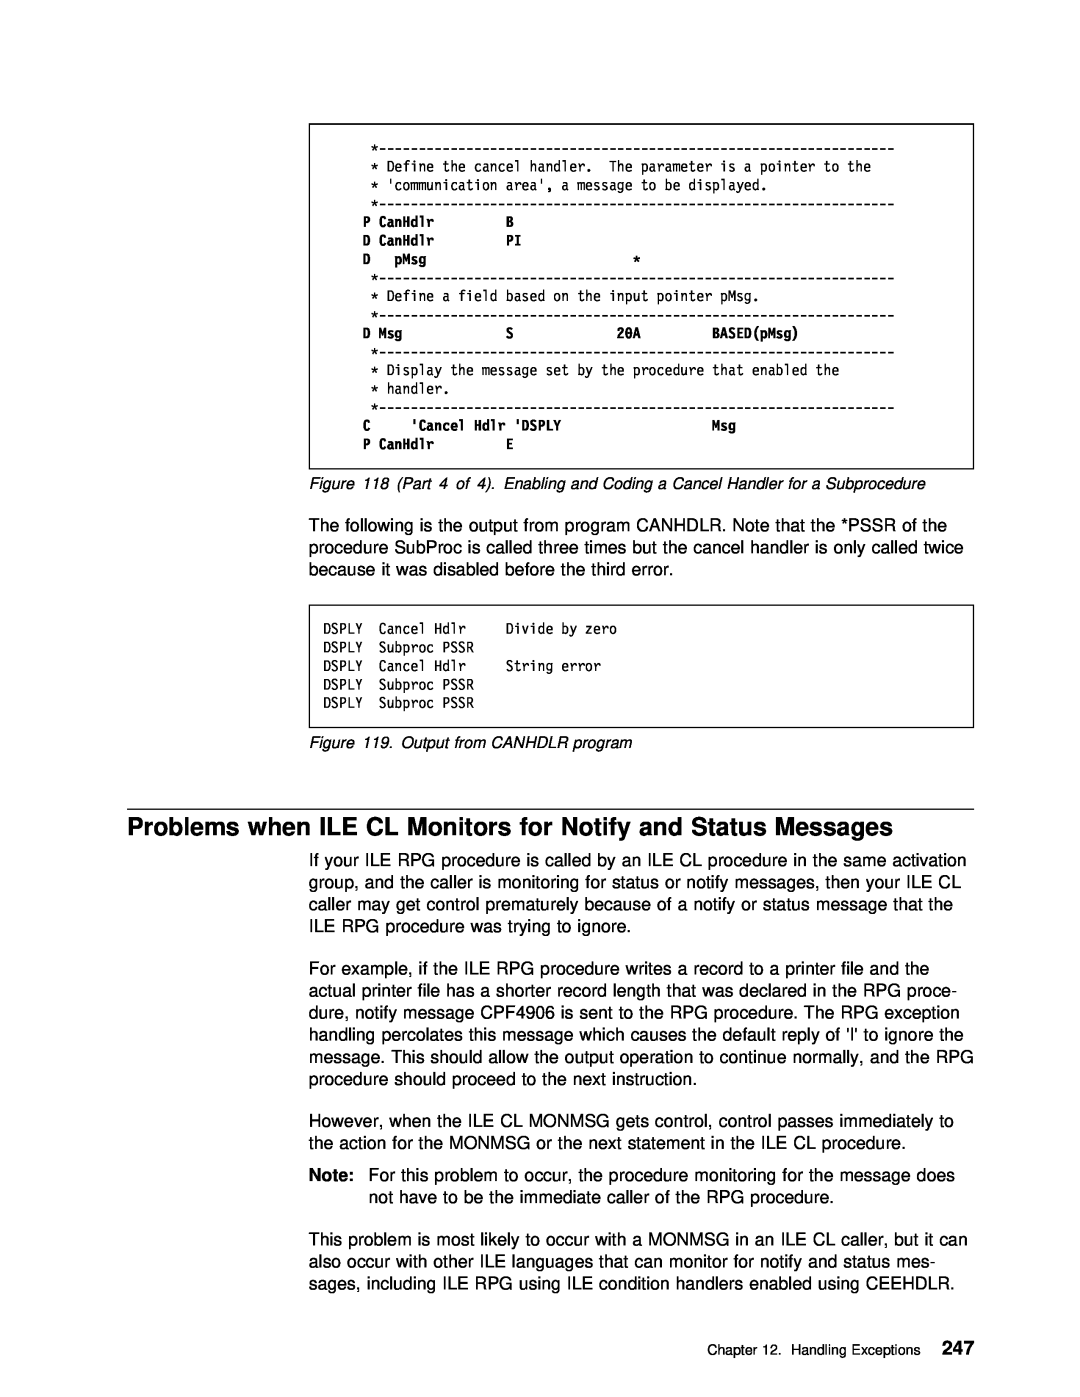 IBM AS/400 manual Problems when ILE CL Monitors for Notify and Status Messages, Output from CANHDLR program 